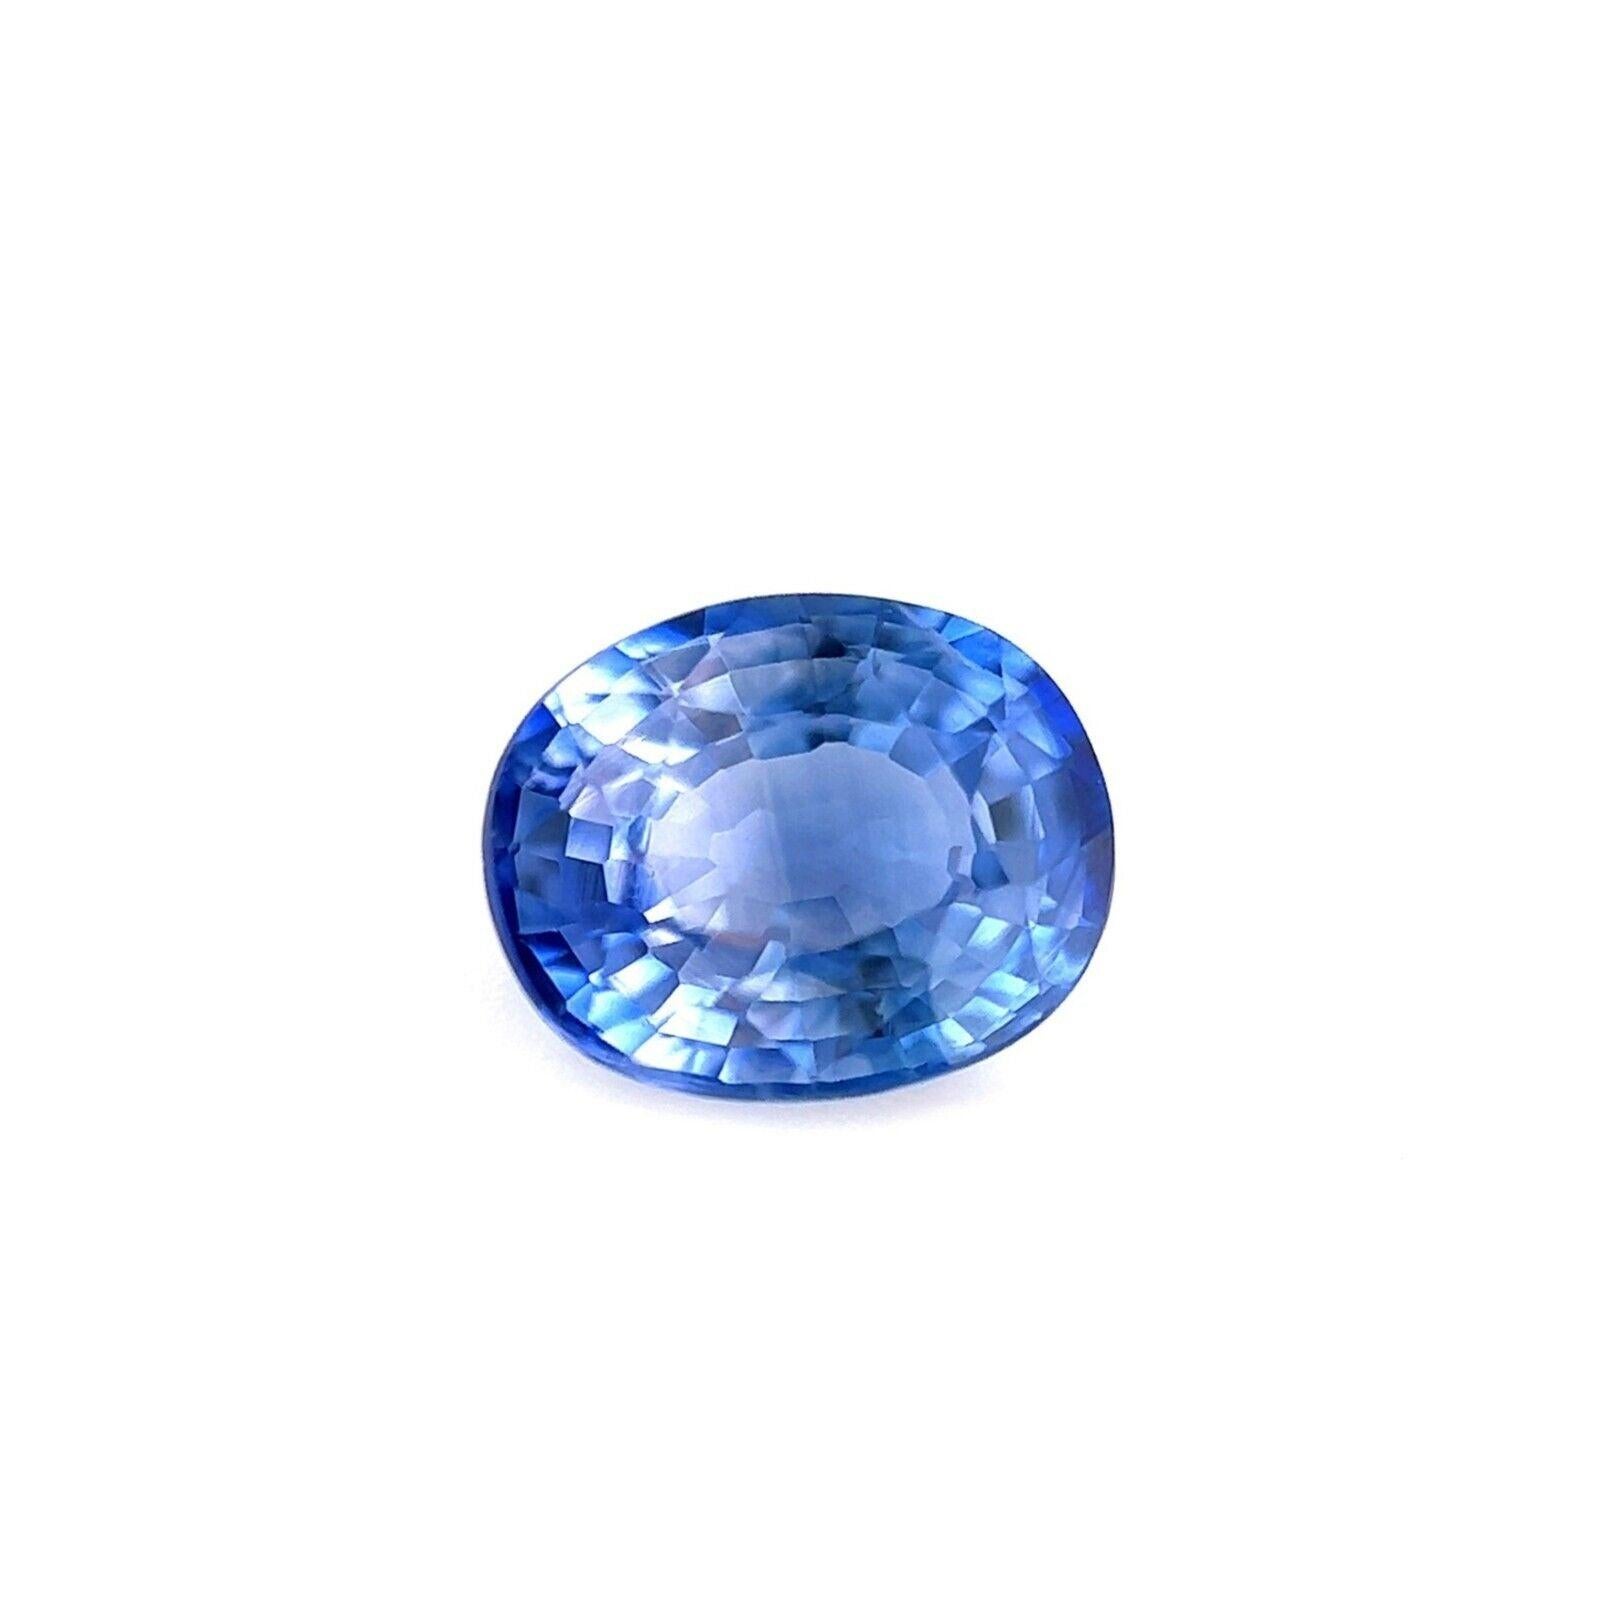 1.13ct Unique Fine Ceylon Blue Violet Sapphire Oval Cut Blue Rare 6.6x5.3mm VS

Unique Ceylon Violet Blue Sapphire Gemstone.
1.13 Carat sapphire with a rare vivid violet blue colour. Also has very good clarity, a very clean stone with only some